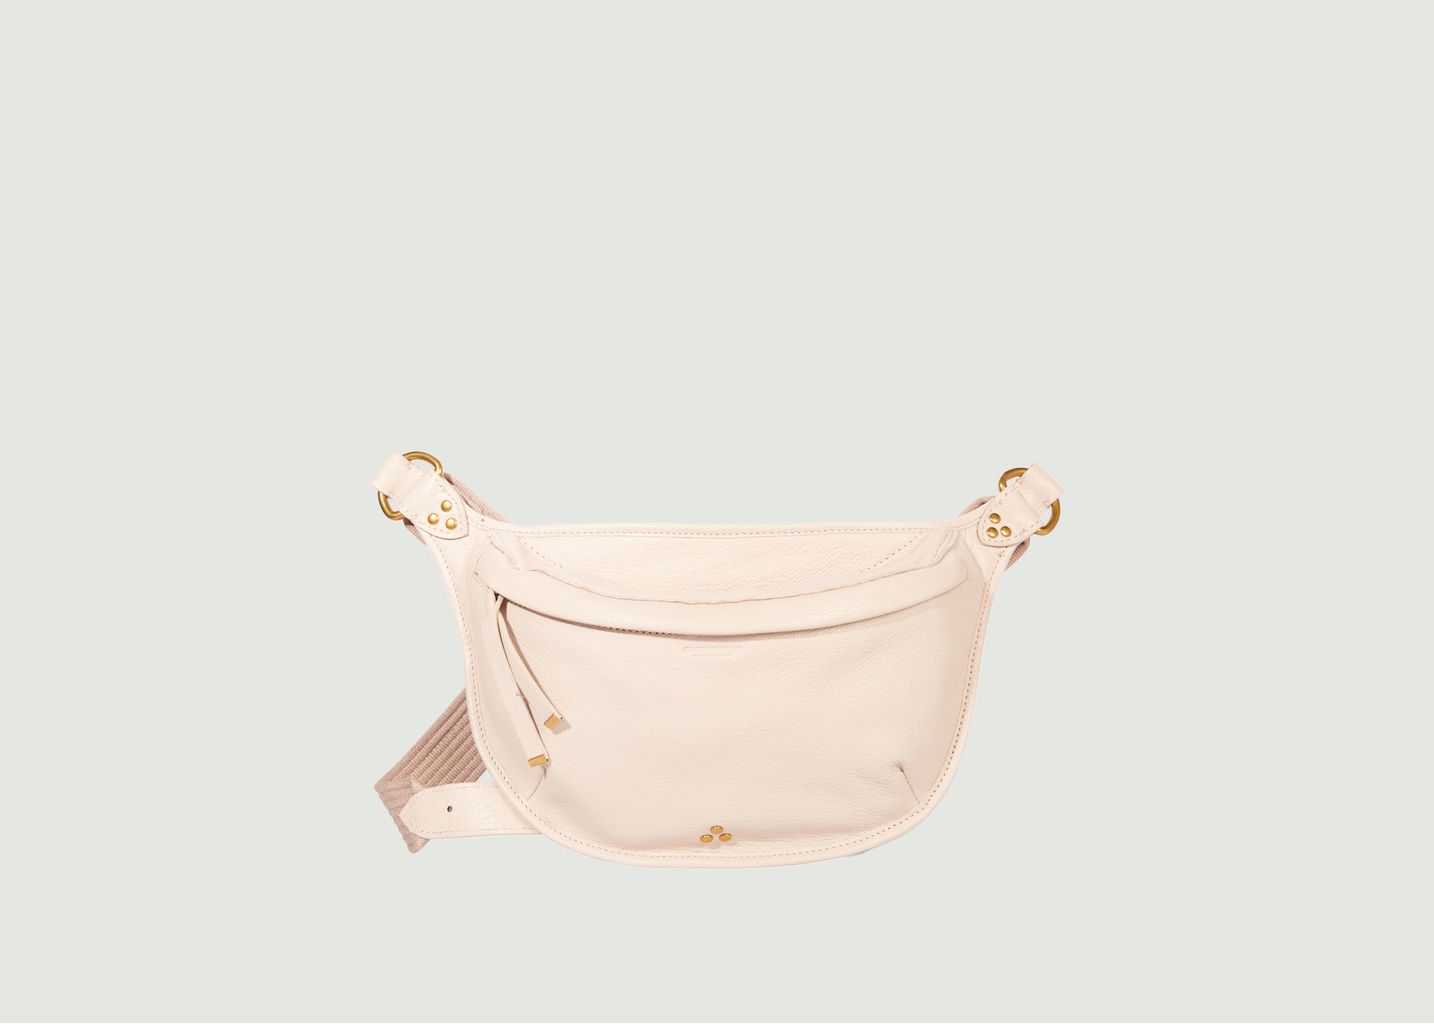 Jerome Dreyfuss Stan Grained Leather Fanny Pack